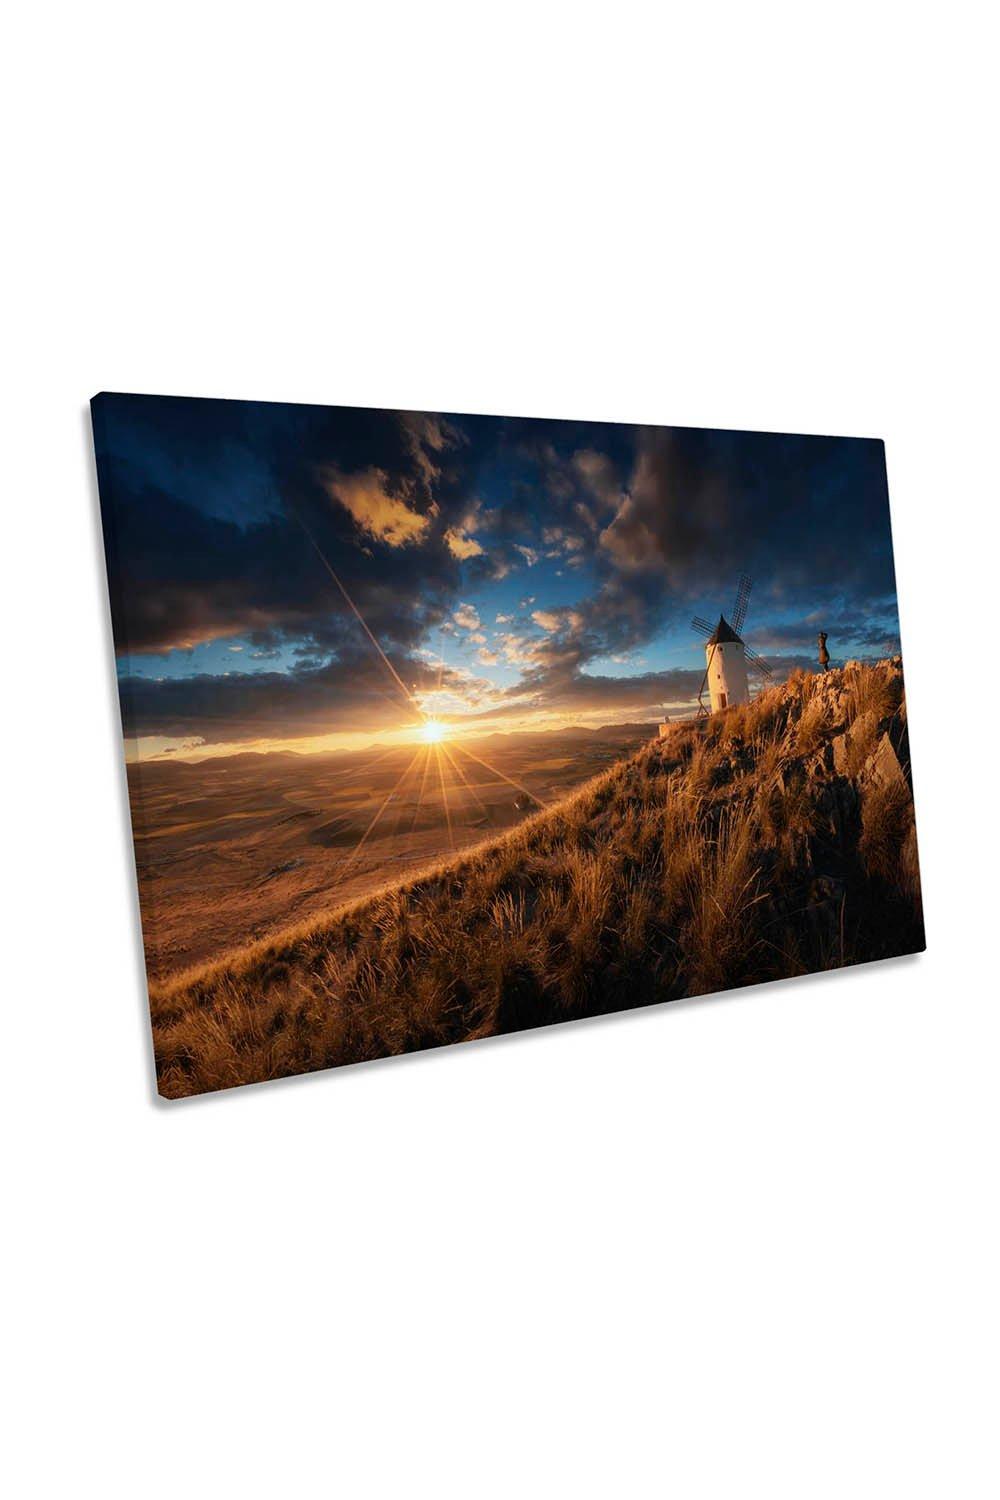 Windmill Spain Sunset Landscape Canvas Wall Art Picture Print